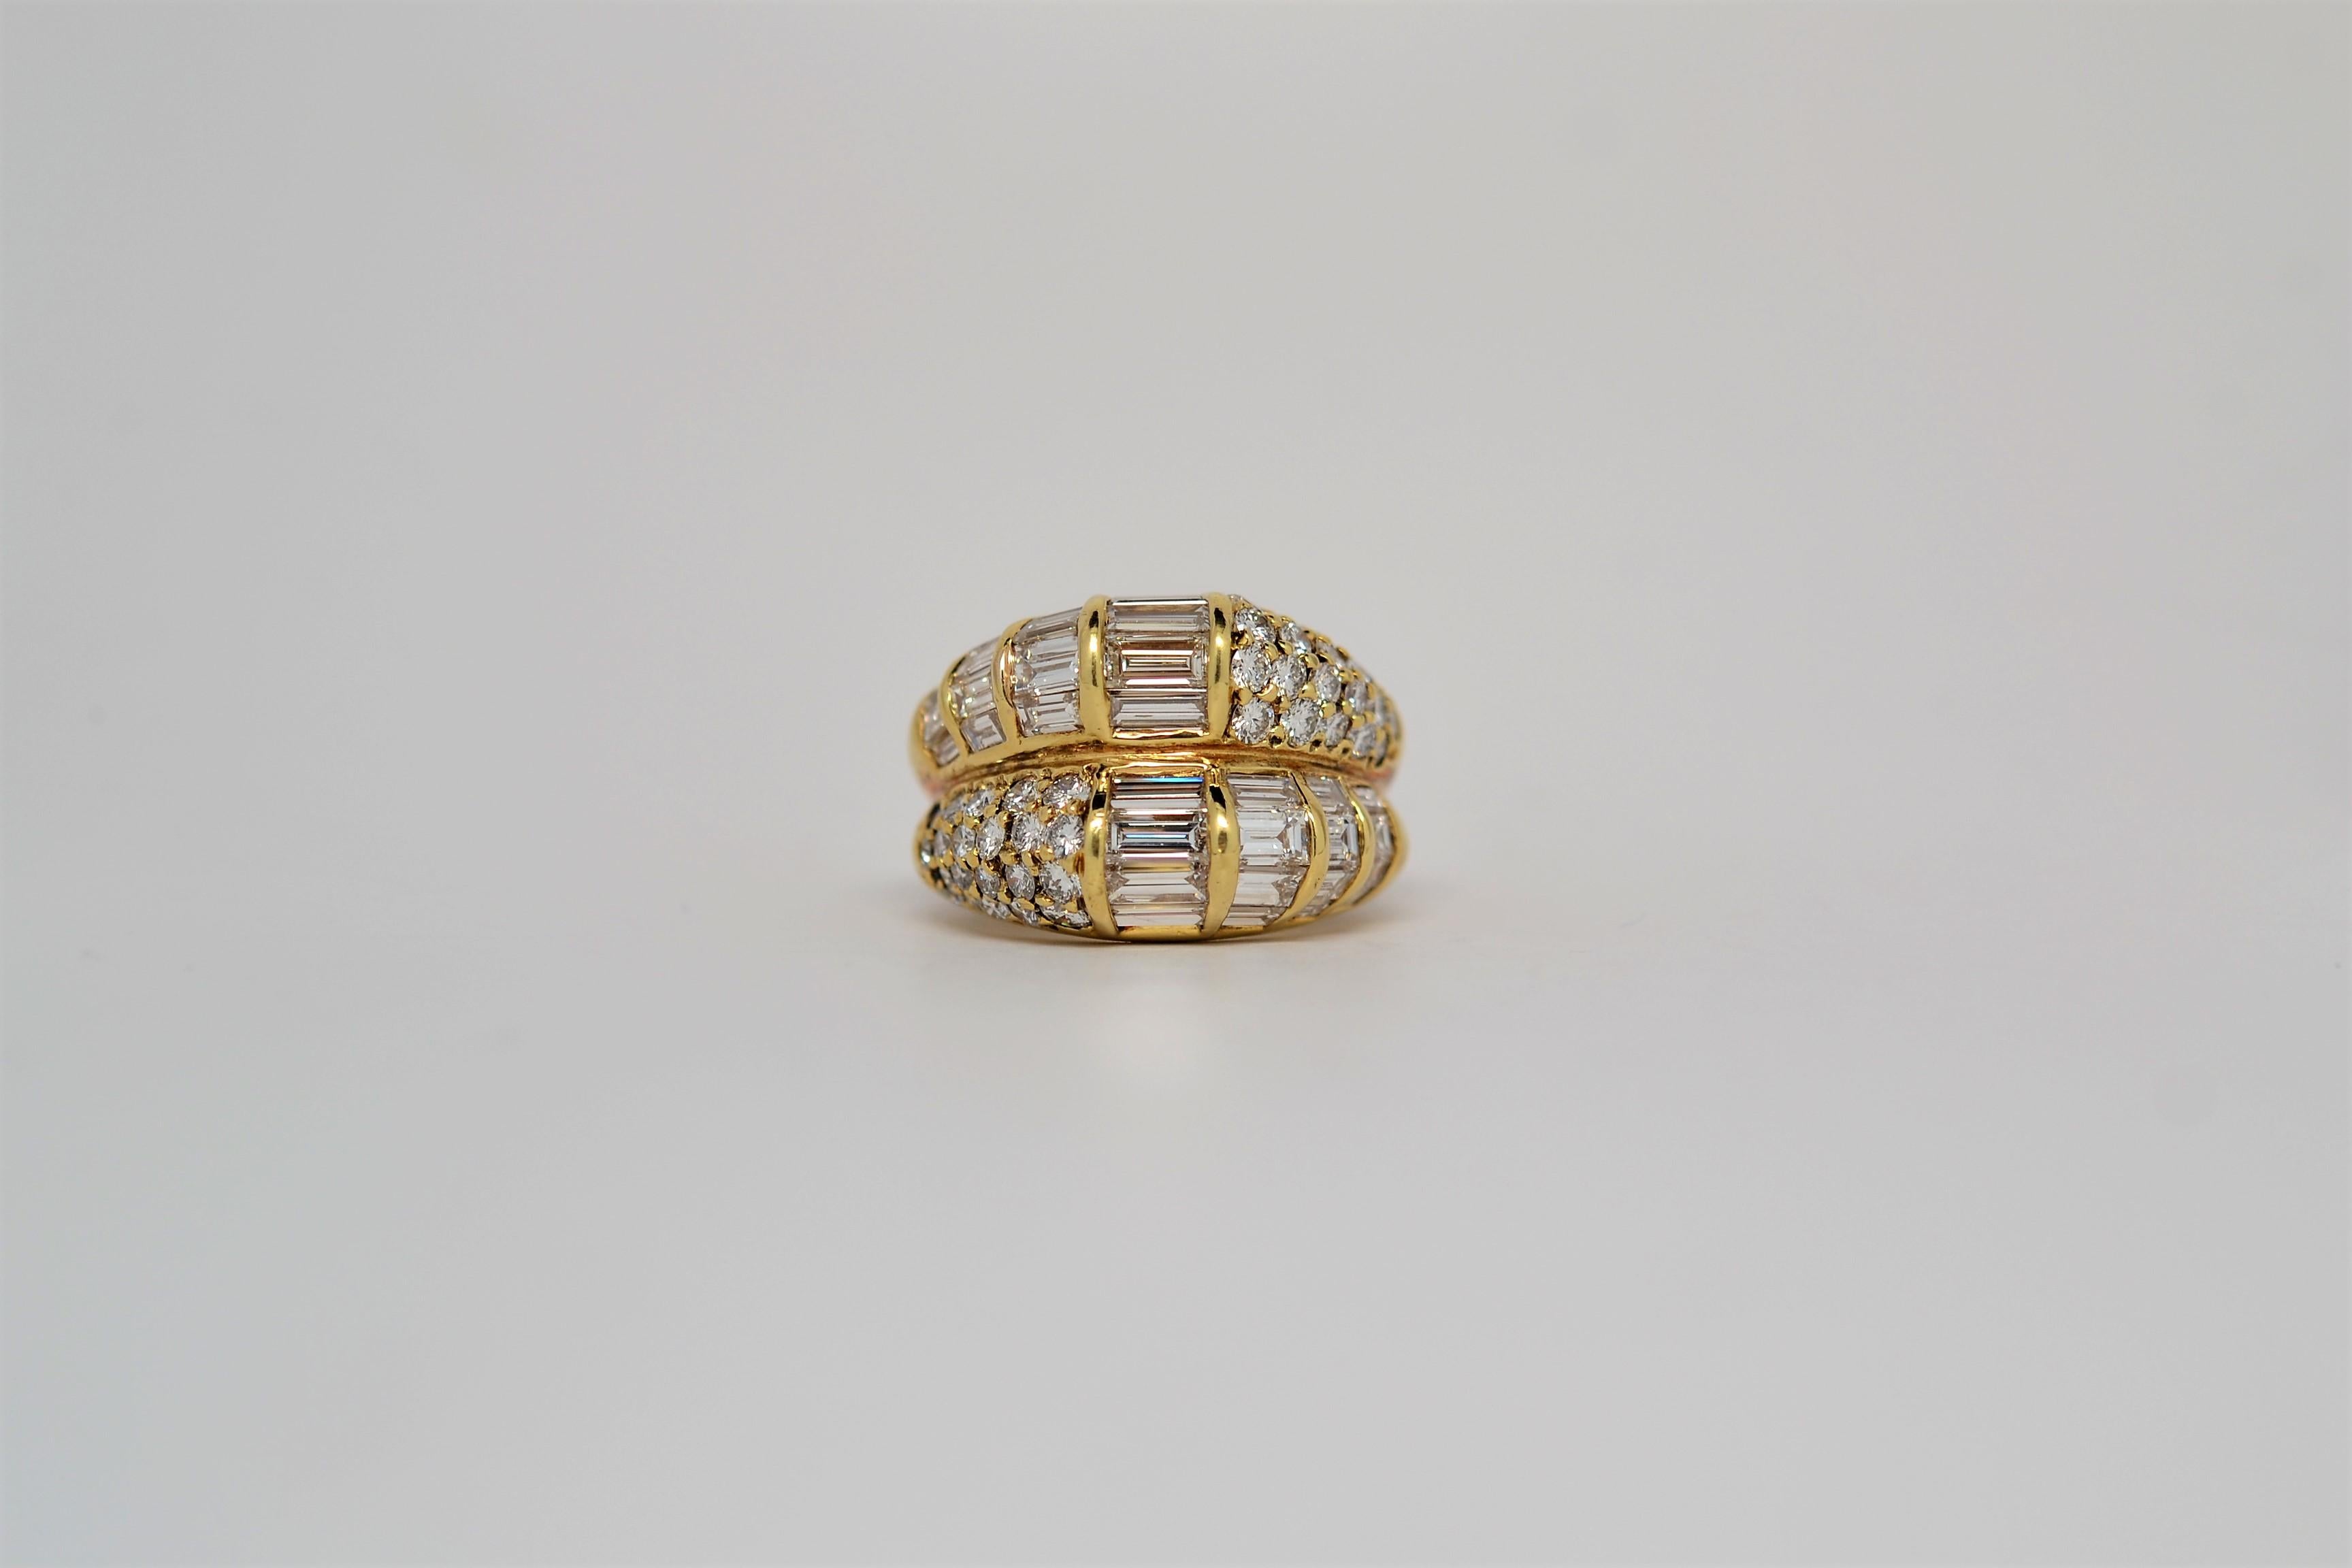 A handmade and very unique ladies' ring set in 18K Yellow Gold. This ring is a two row design with a domed layout of Baguette Diamonds and Round Brilliant Cut Diamonds. Finely crafted channel settings arrange the Baguette Diamonds in domed fashion